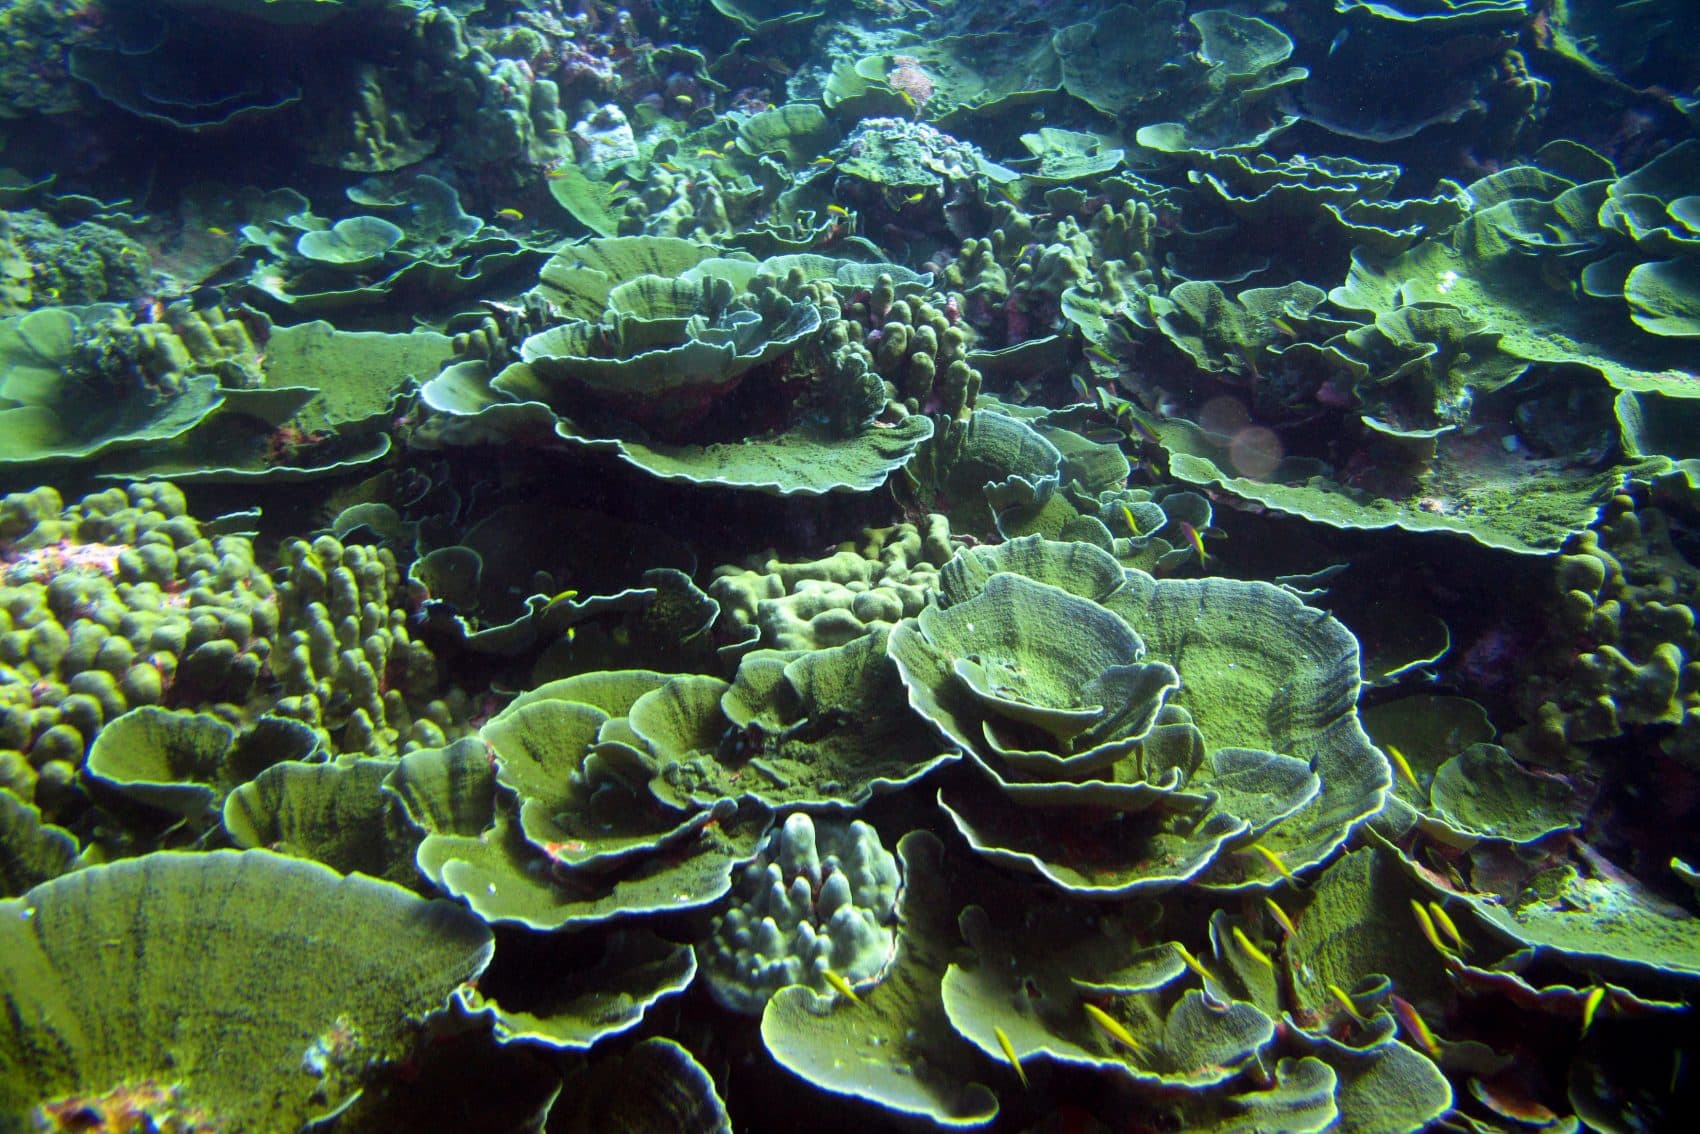 Coral on a reef off Kanton Island in the Pacific Ocean. (Courtesy of Randi Rotjan)